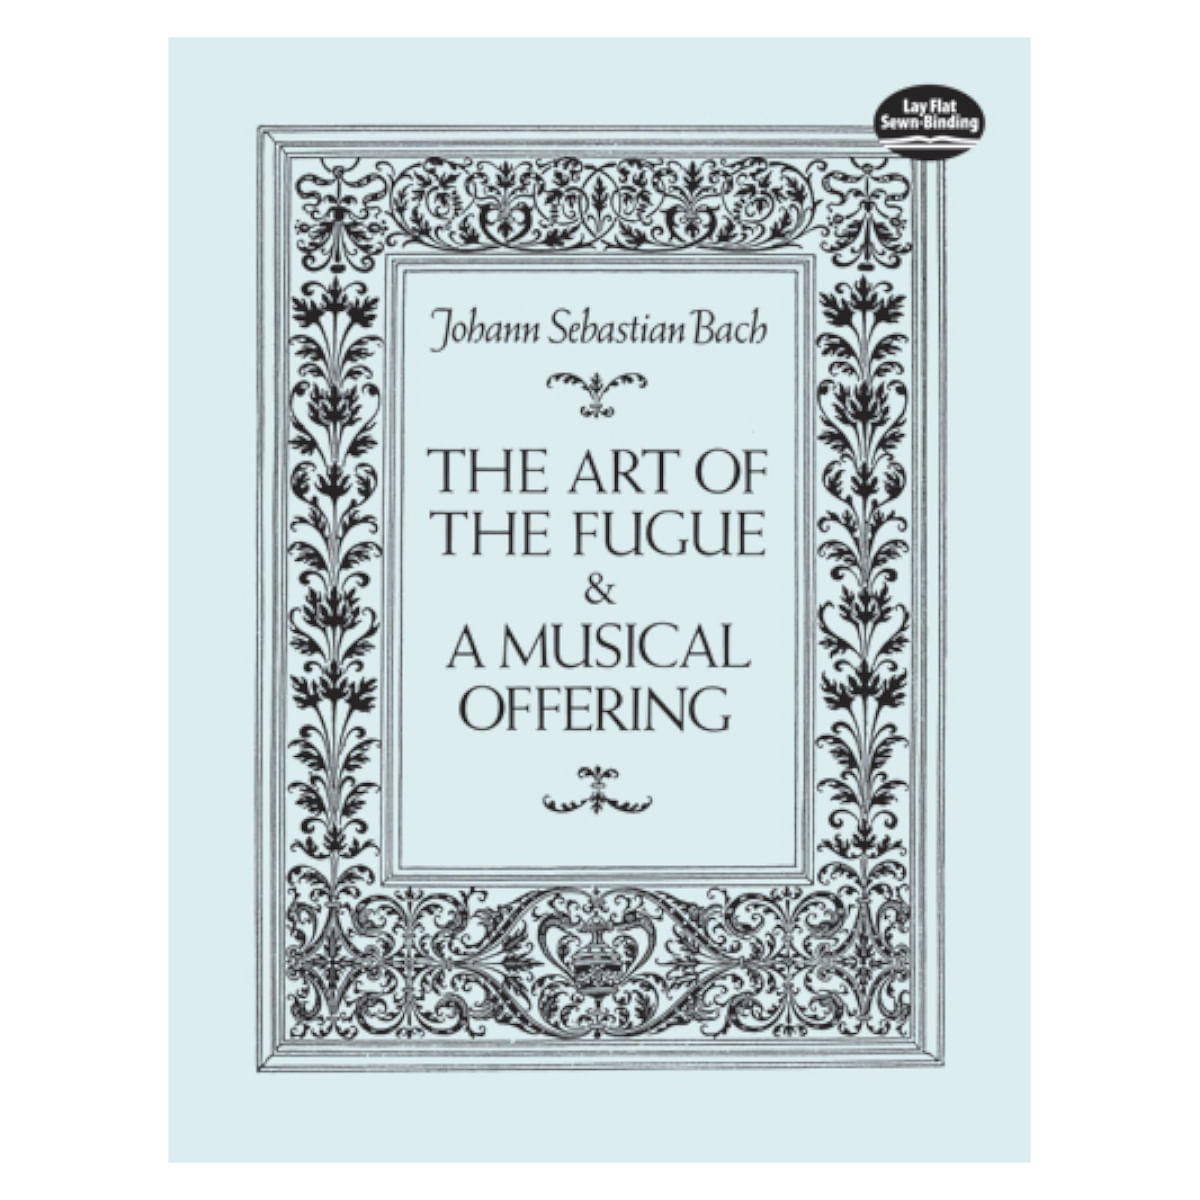 Art　J　Best　S,　The　in　Musical　Buy　of　Fugue　A　Books　Bach　Classical　Offering　the　India